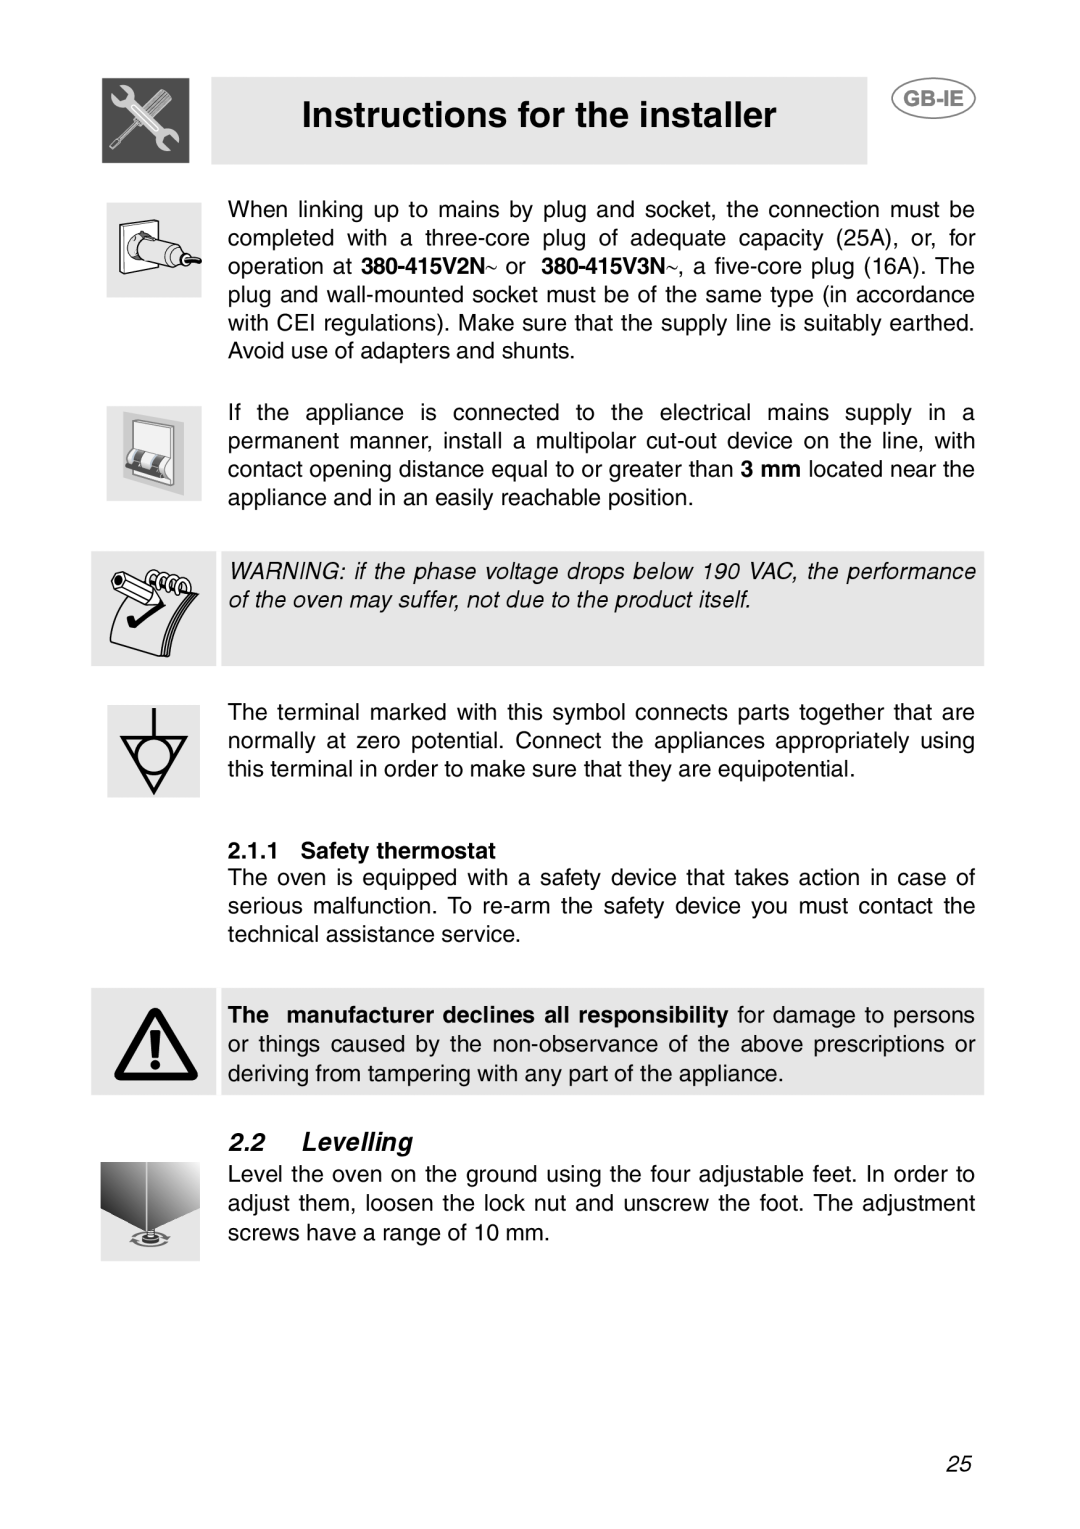 Smeg ALFA141VE, ALFA141XE manual Instructions for the installer, 2.2Levelling, Safety thermostat 